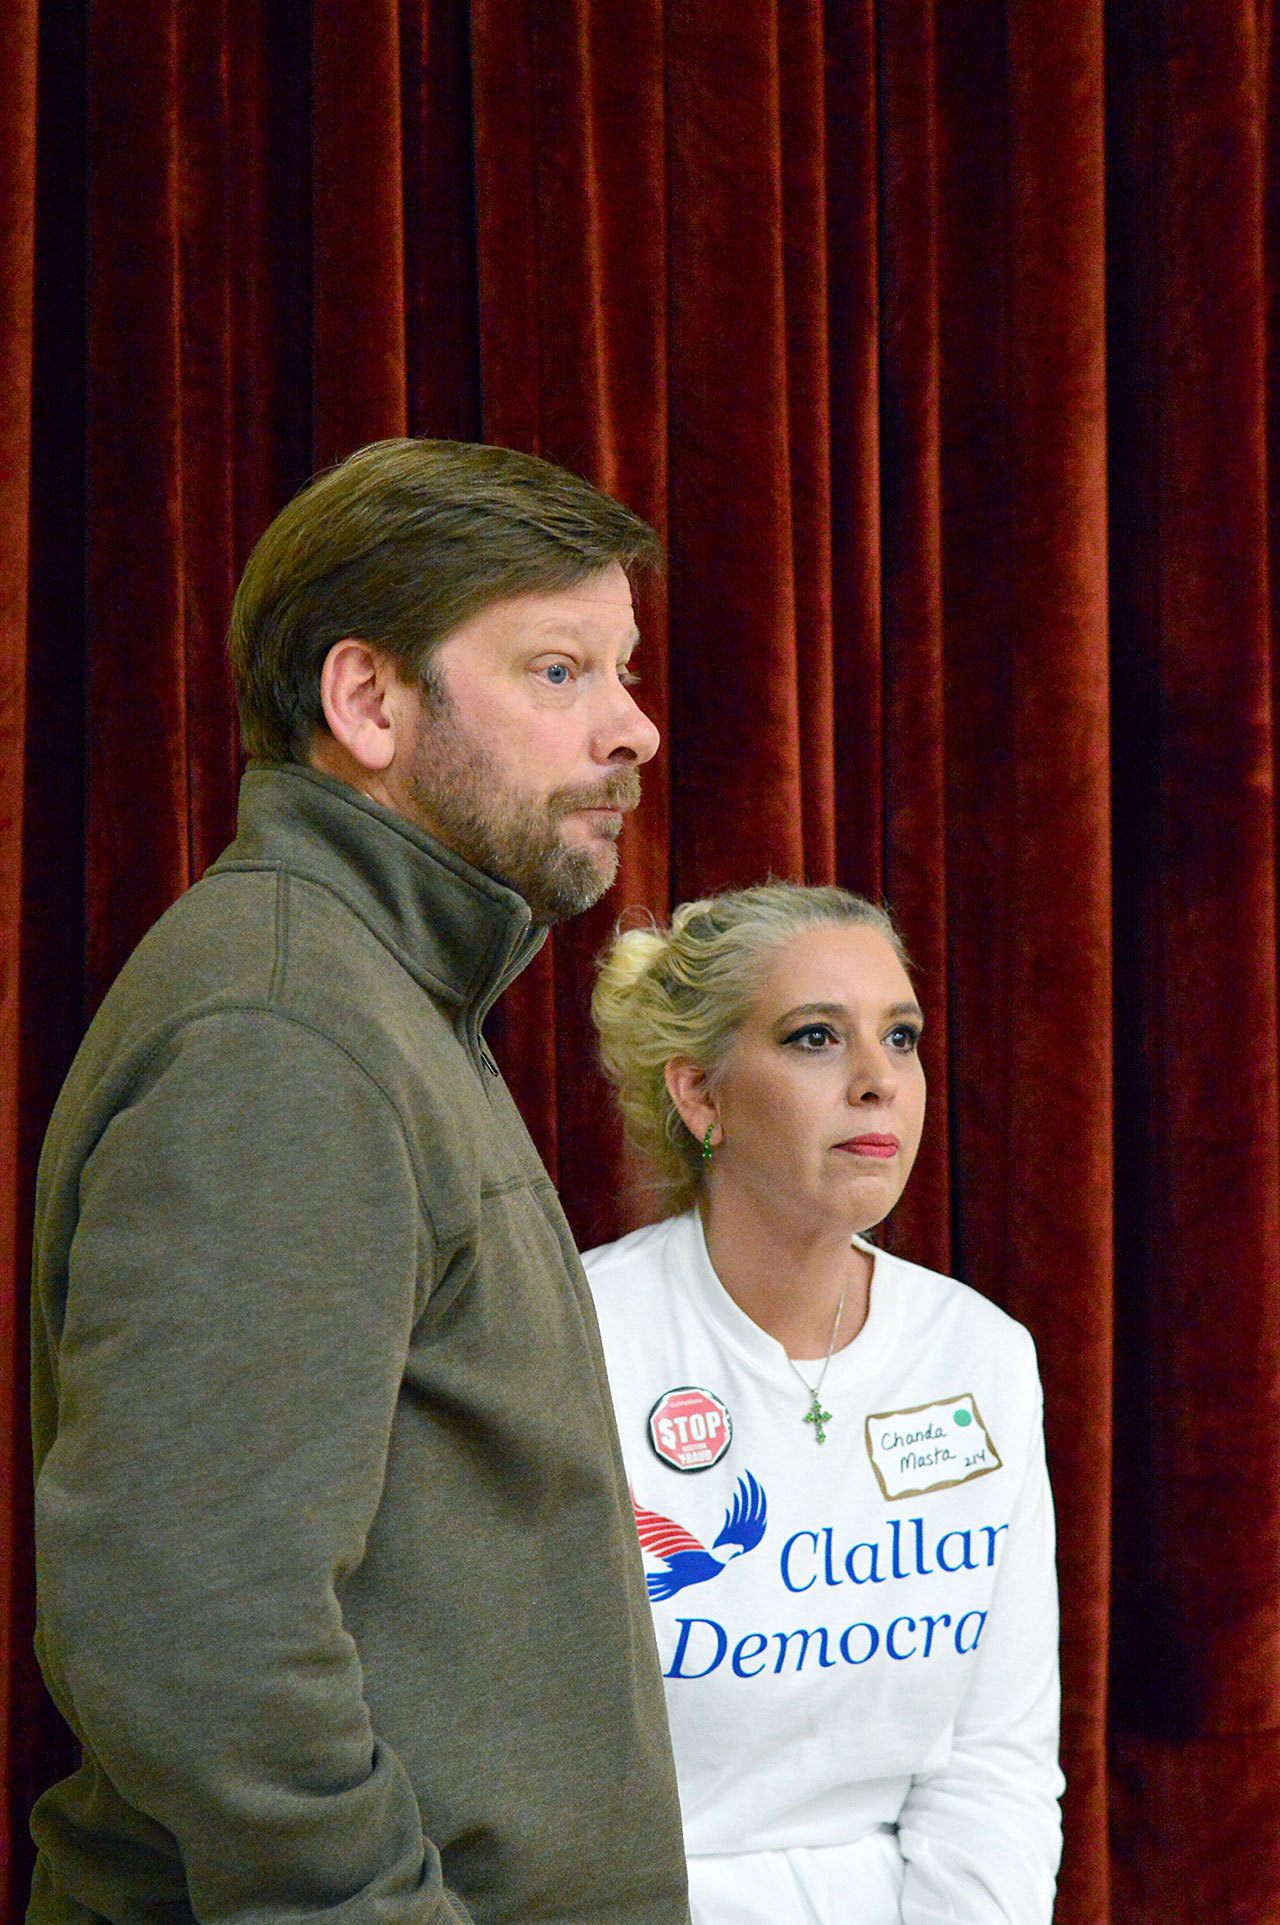 State Rep.-elect Mike Chapman and Clallam County Progressives member Chanda Mast advocated party unity at the Clallam County Democrats’ reorganization meeting at Jefferson School in Port Angeles on Dec. 3. (Diane Urbani de la Paz/For Peninsula Daily News)